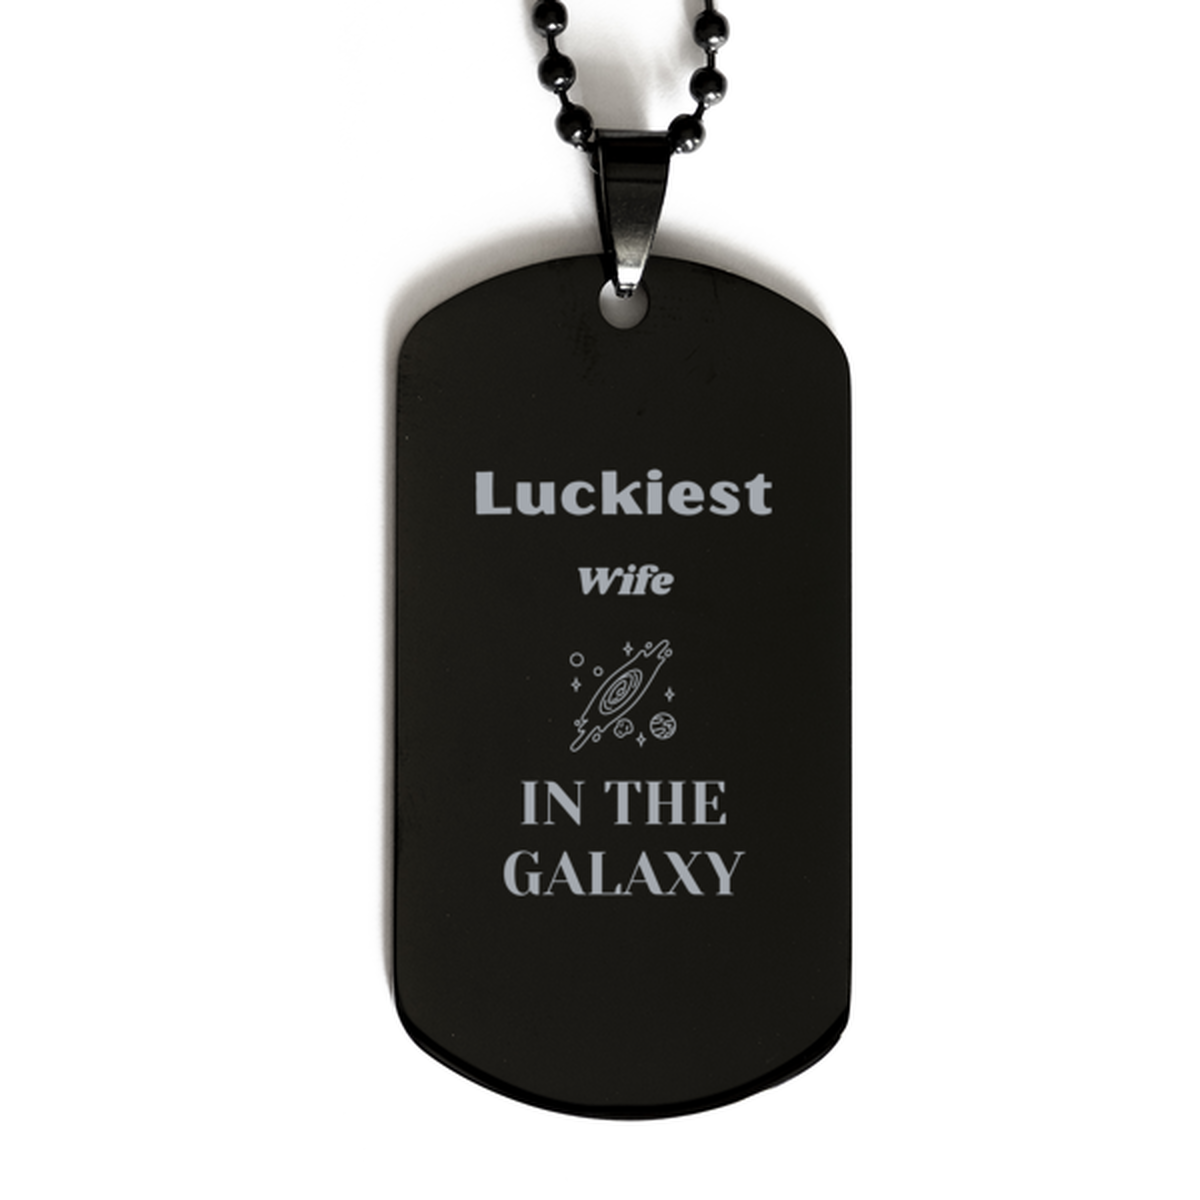 Luckiest Wife in the Galaxy, To My Wife Engraved Gifts, Christmas Wife Black Dog Tag Gifts, X-mas Birthday Unique Gifts For Wife Men Women